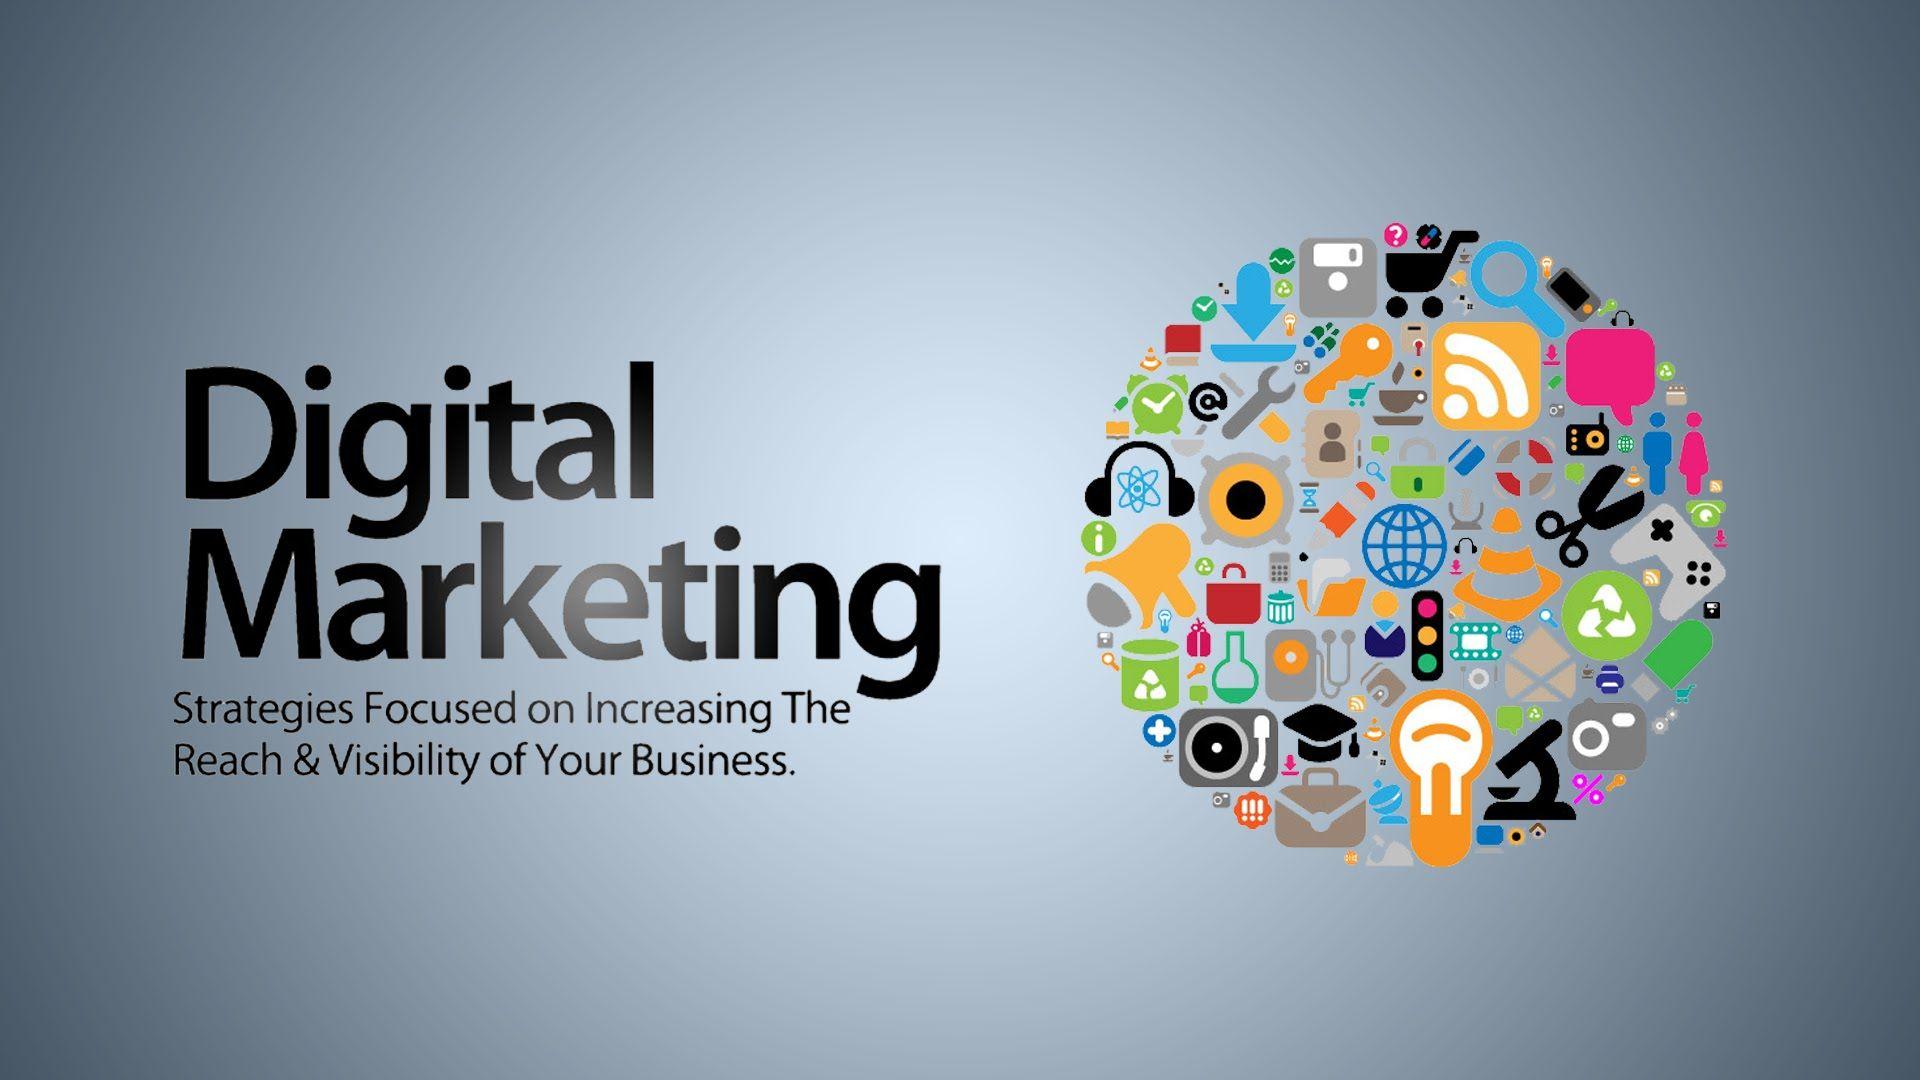 The 5 Keys to a Solid Digital Marketing Strategy